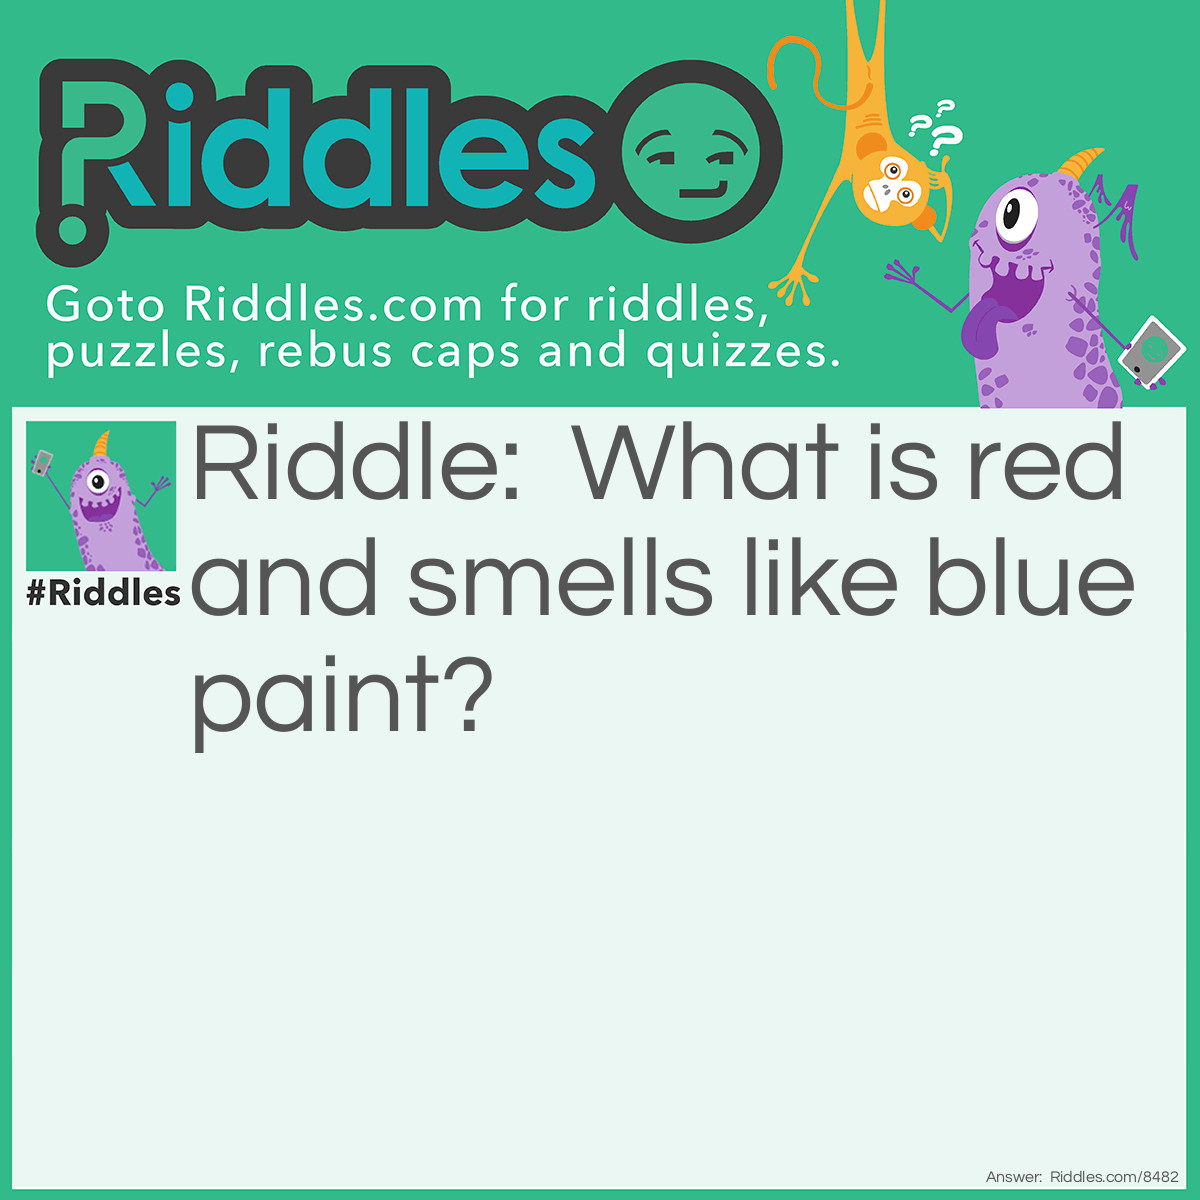 Riddle: What is red and smell like blue paint? Answer: Red paint.